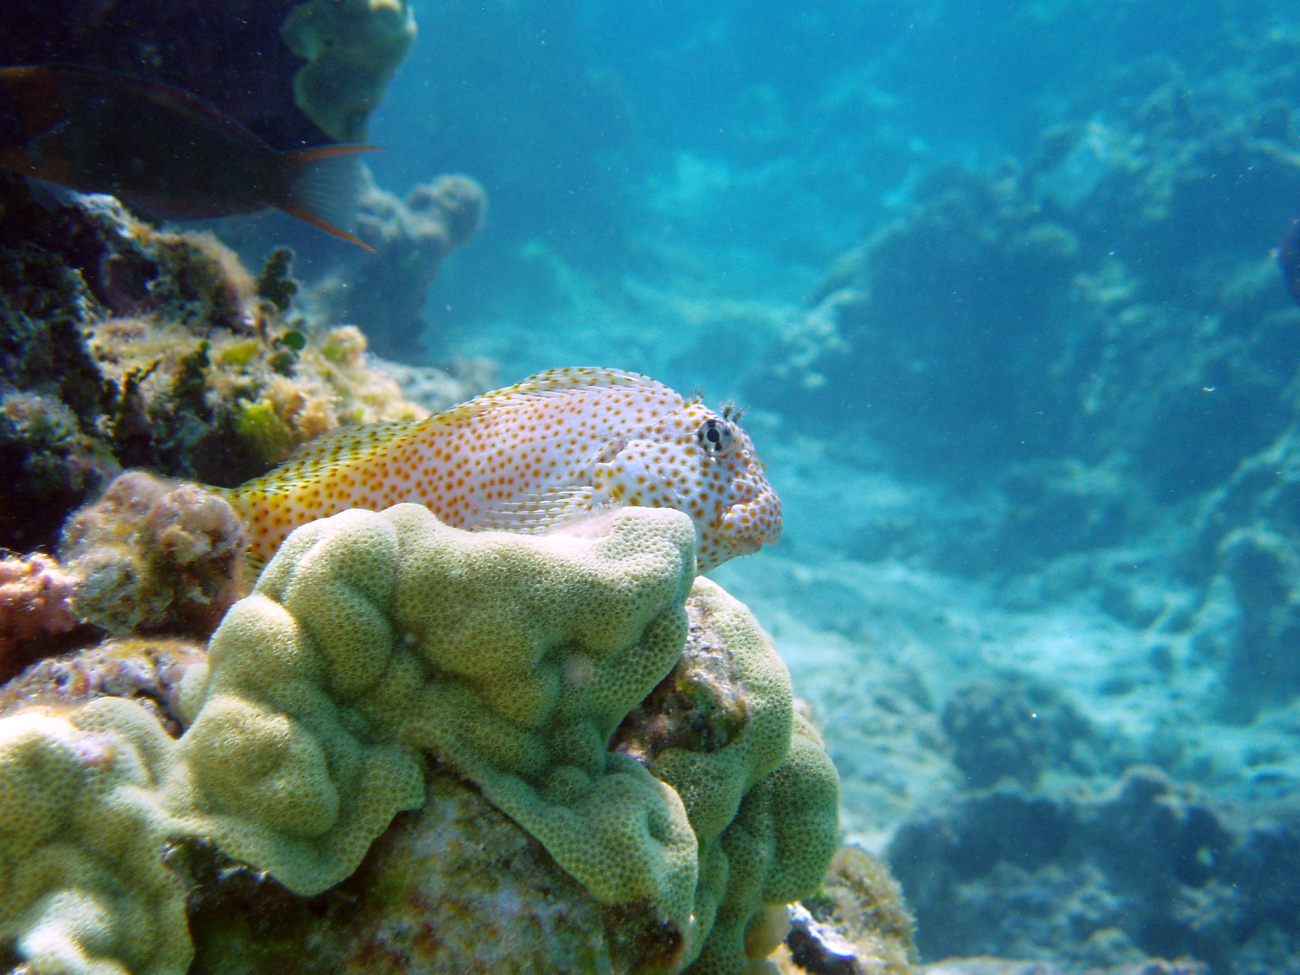 Short-bodied blenny sits atop a ledge